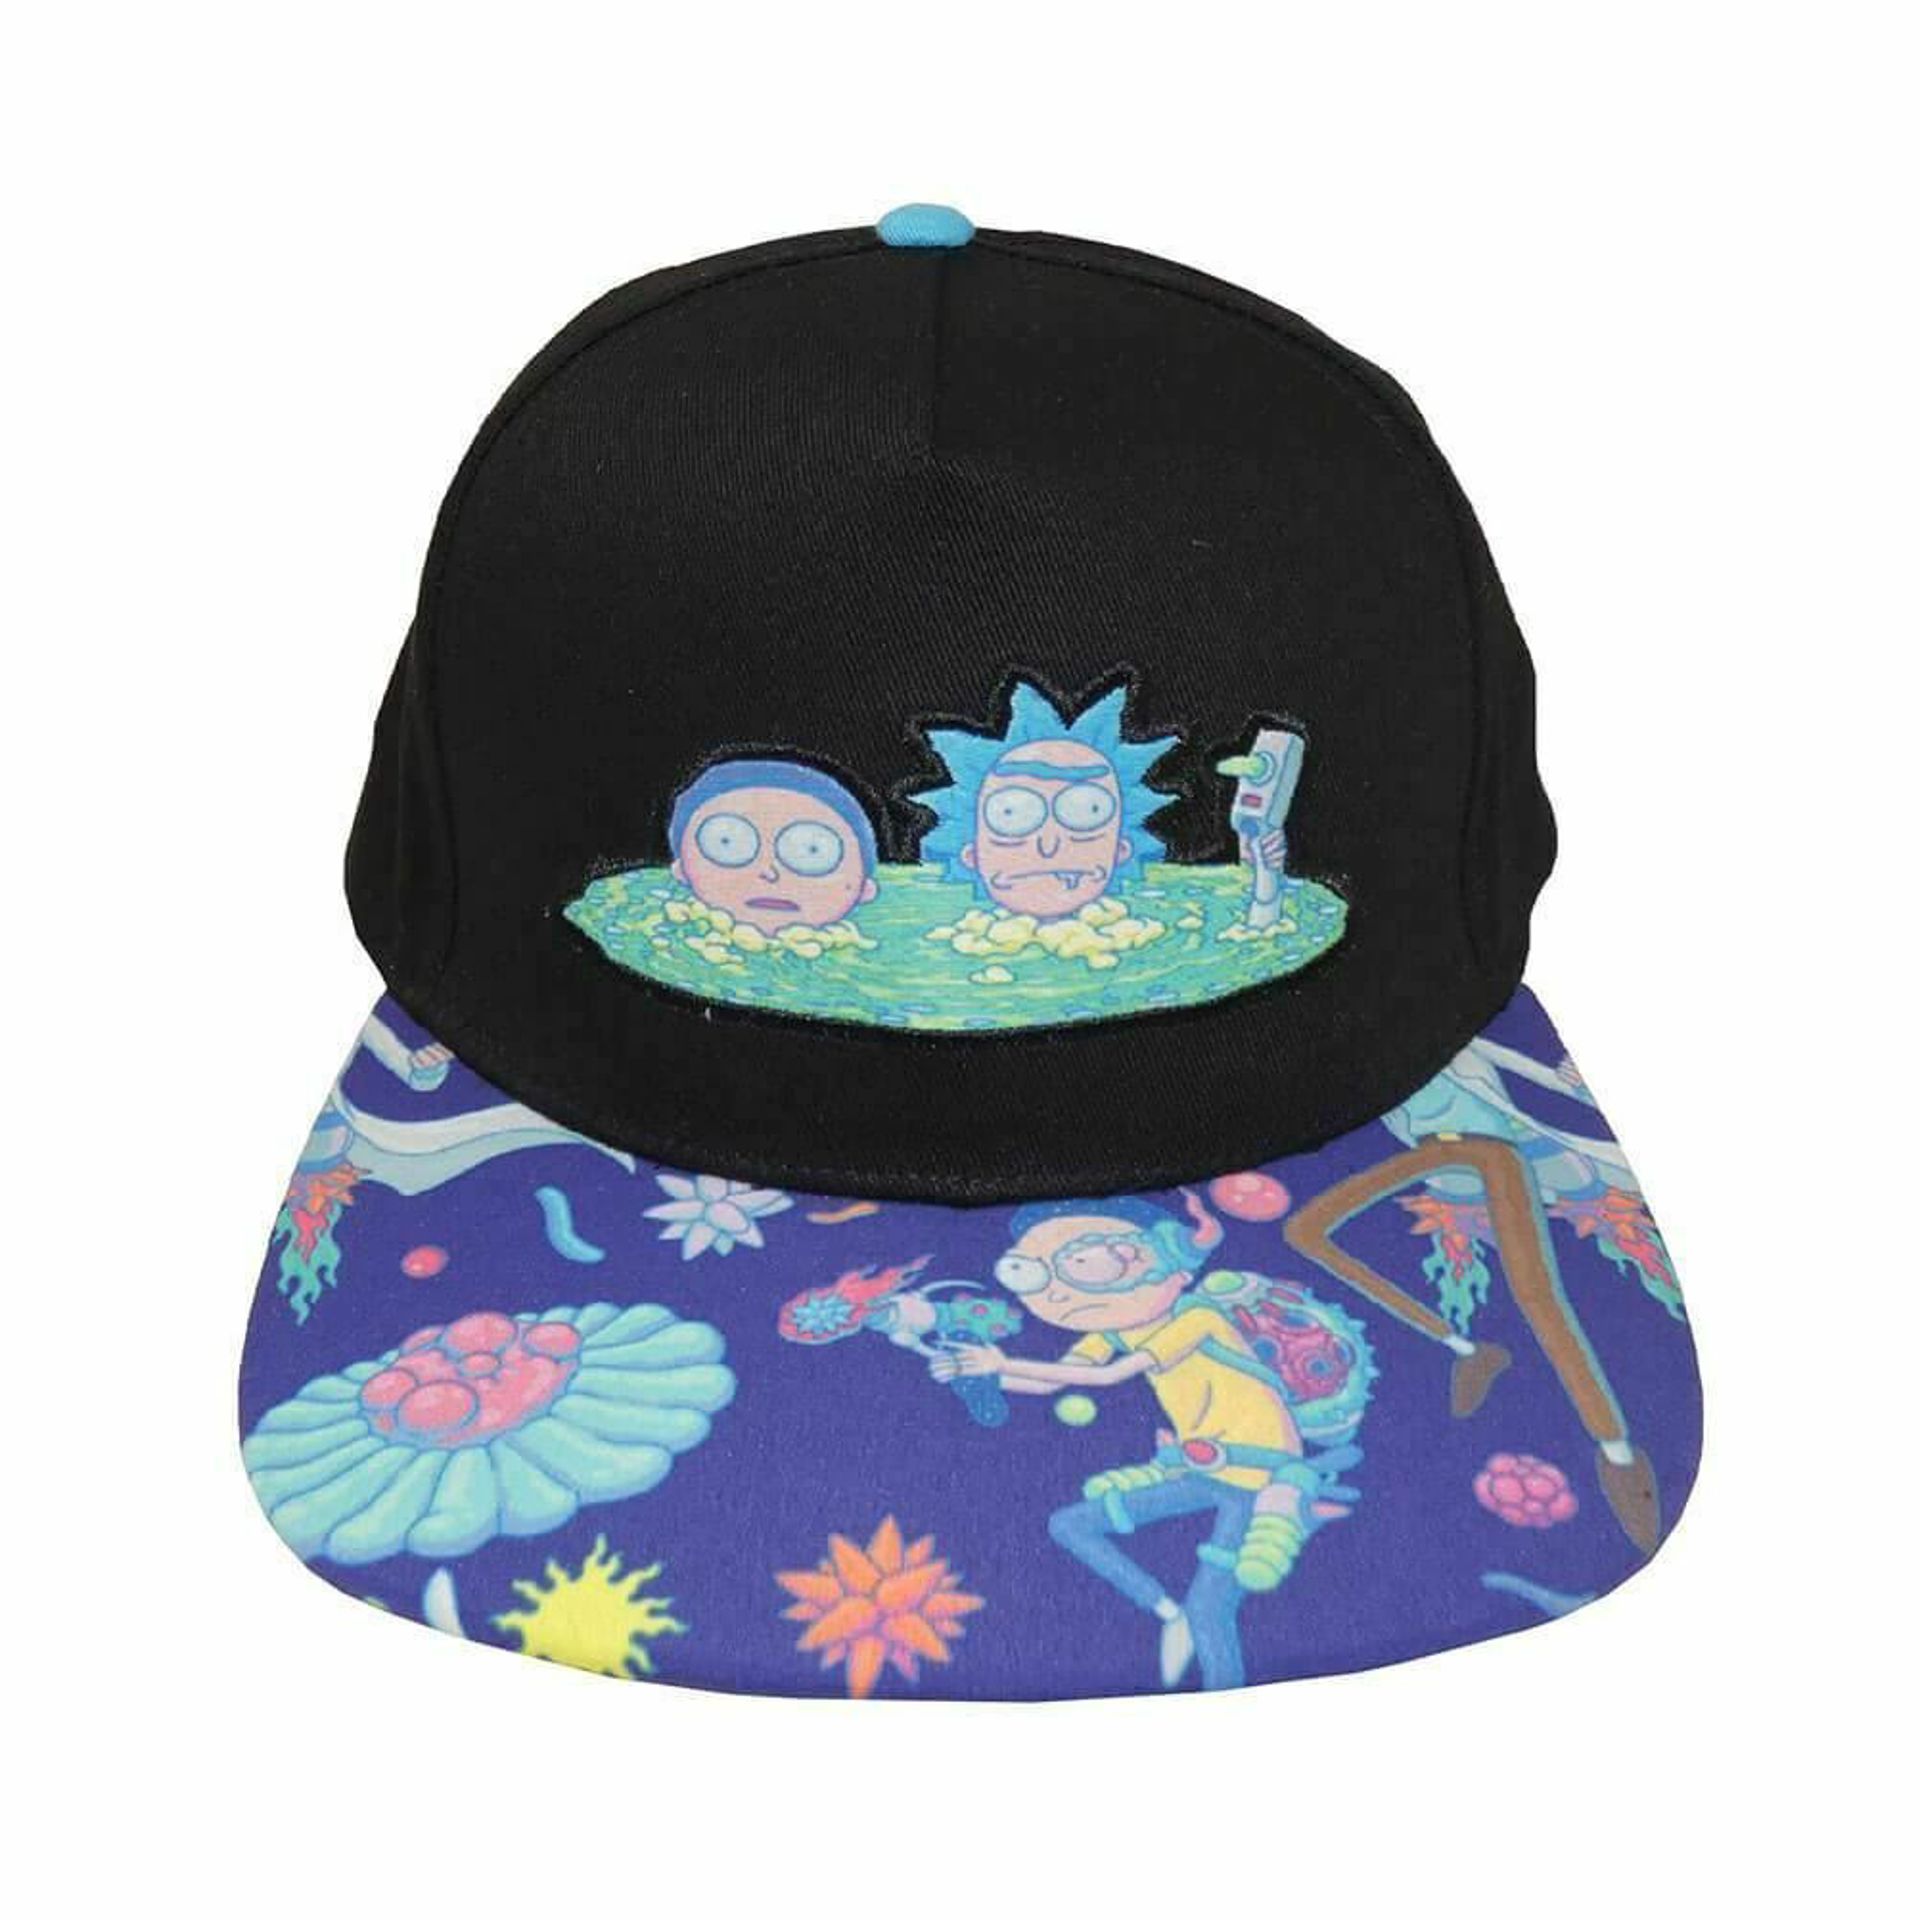 Rick and Morty - Casquette Snapback Noire Portail